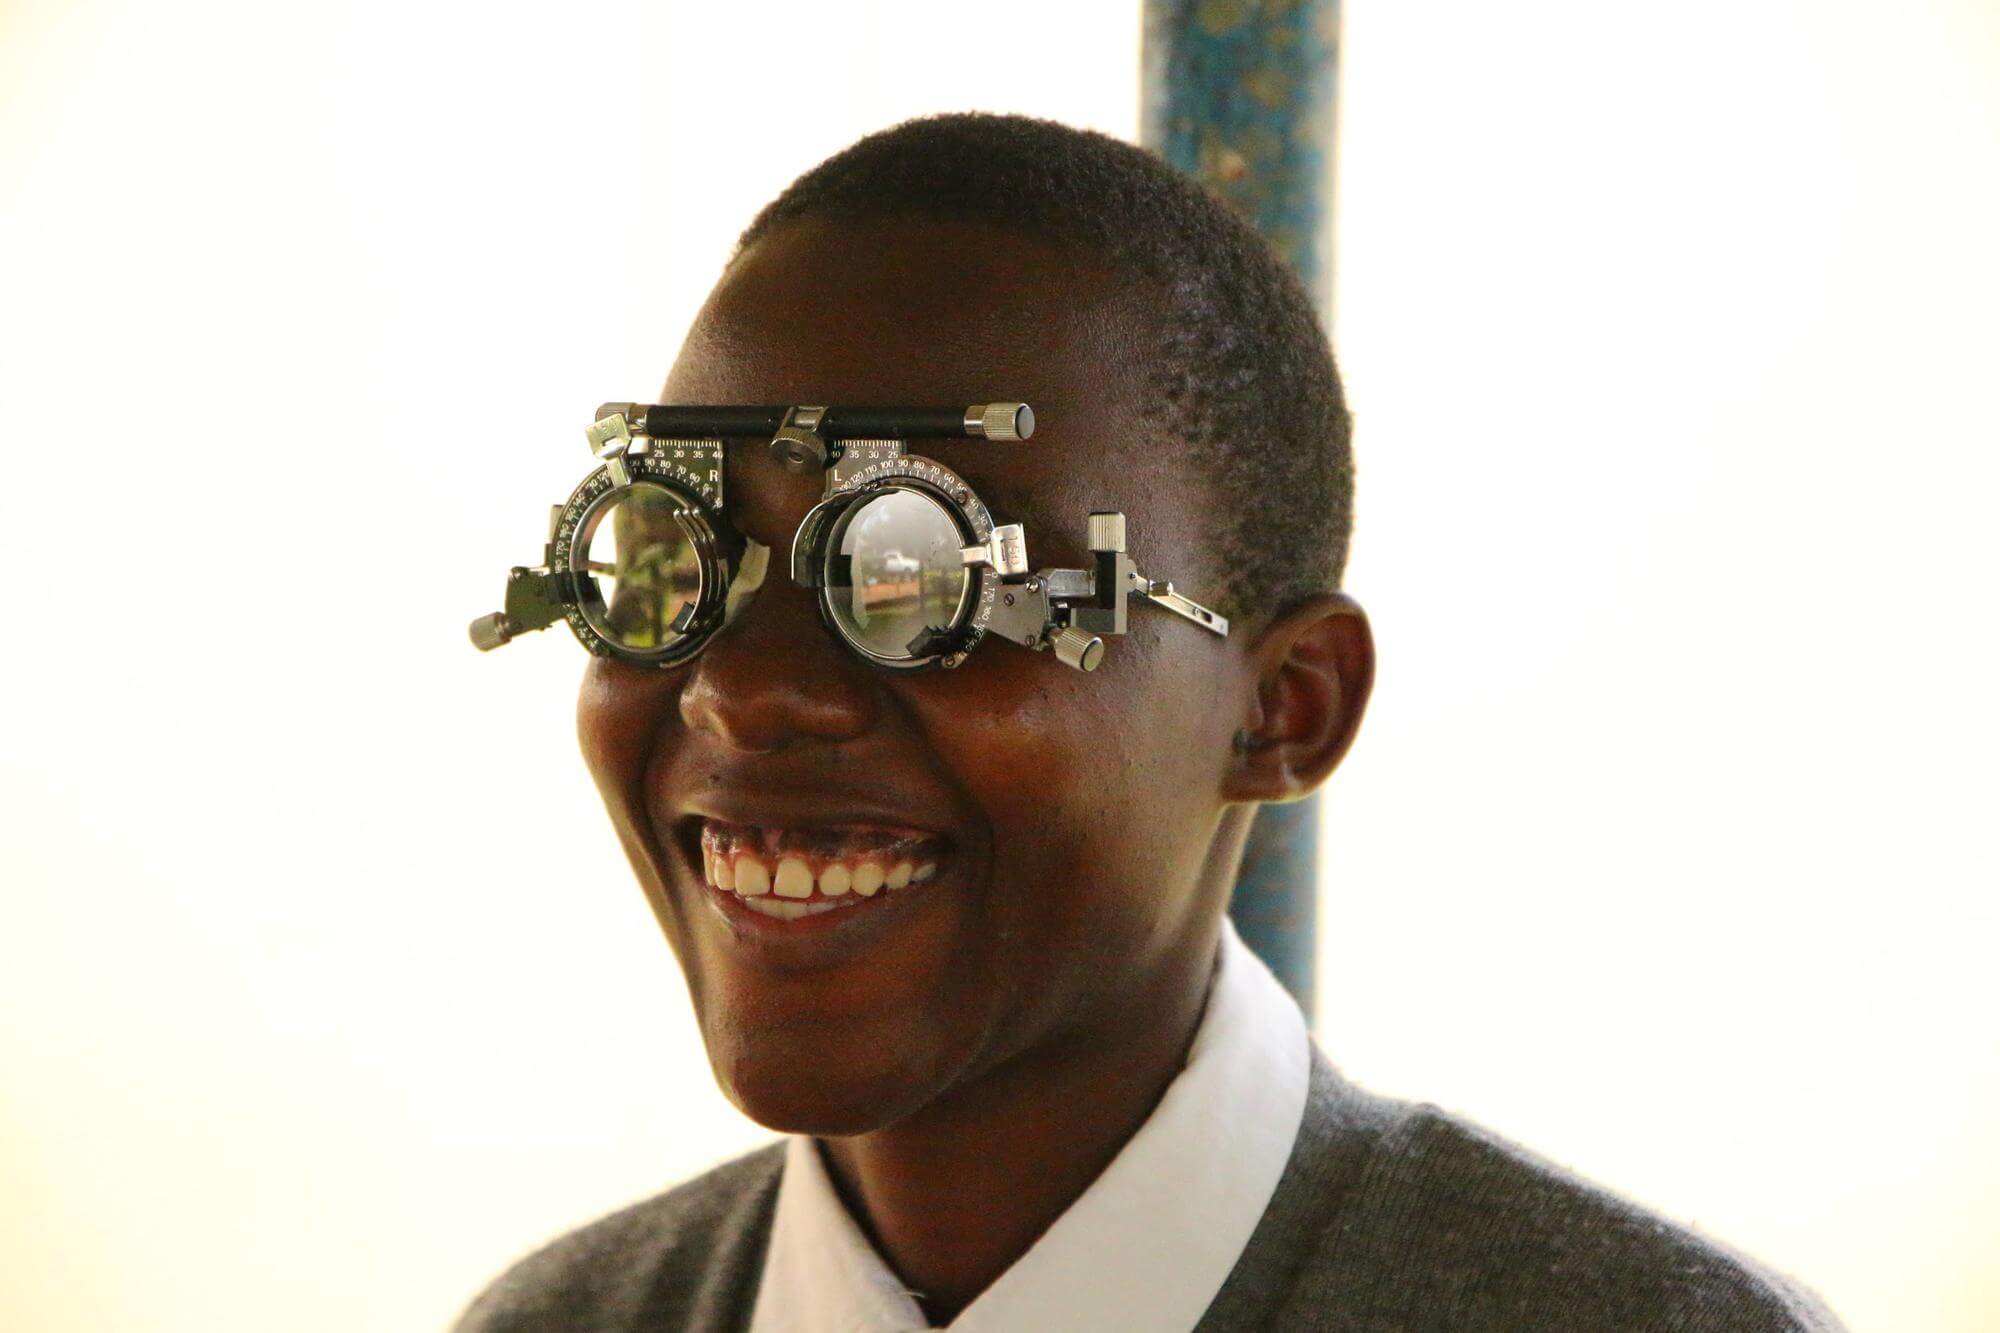 Image of Aidah, a pupil at Iganga Secondary School in Uganda, having her eyes tested as part of the child eye health 1, 2, 3 I can see! programme. ©Light for the World.